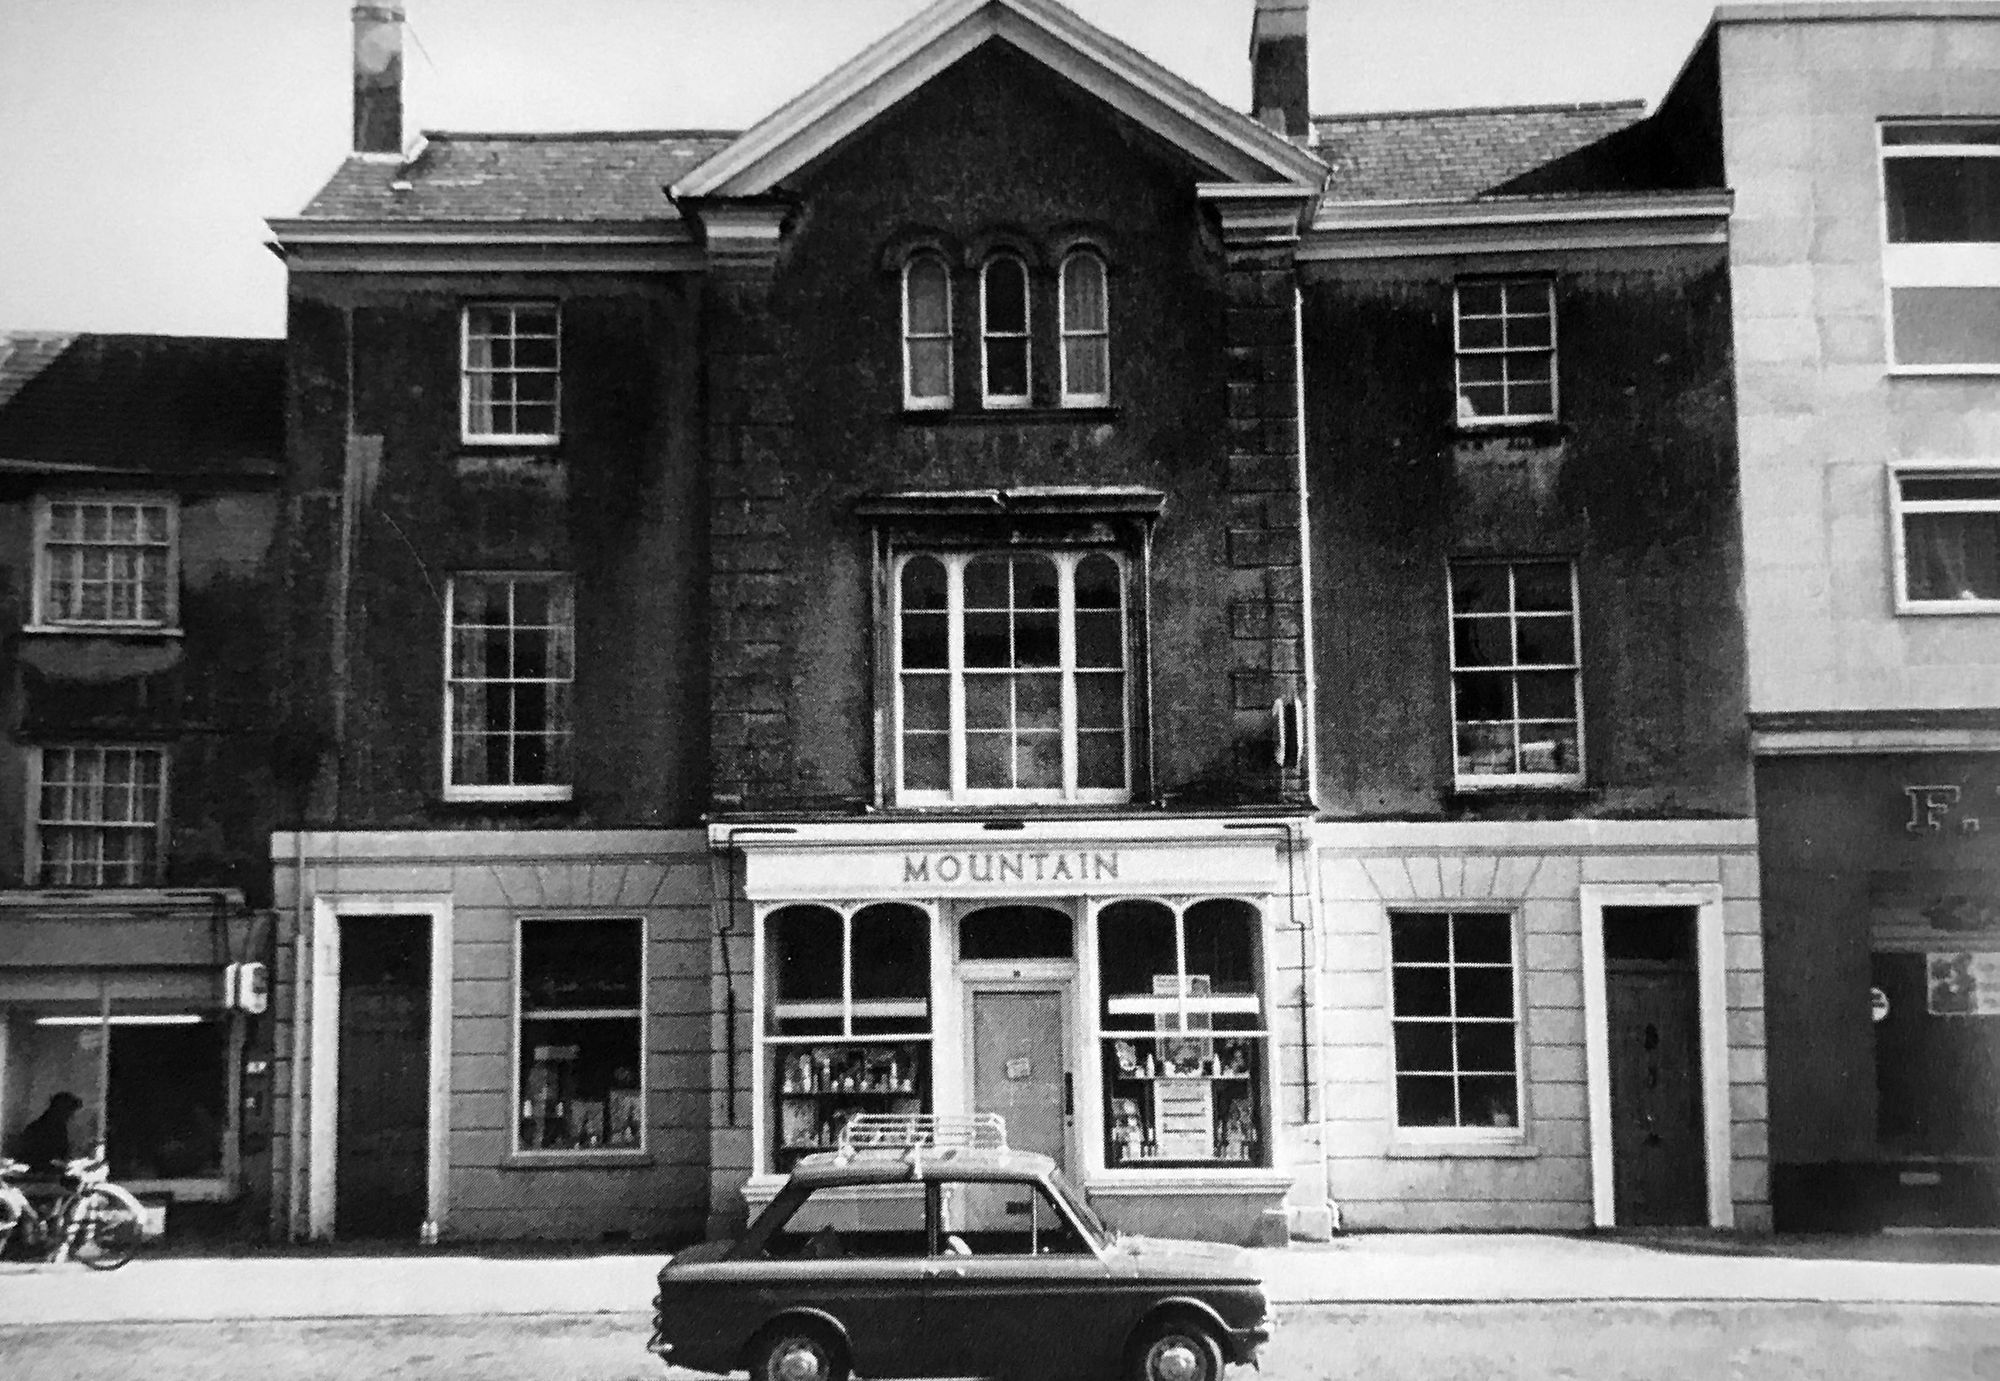 Exterior of Mountain's chemist shop in Sheep Street, 1967.